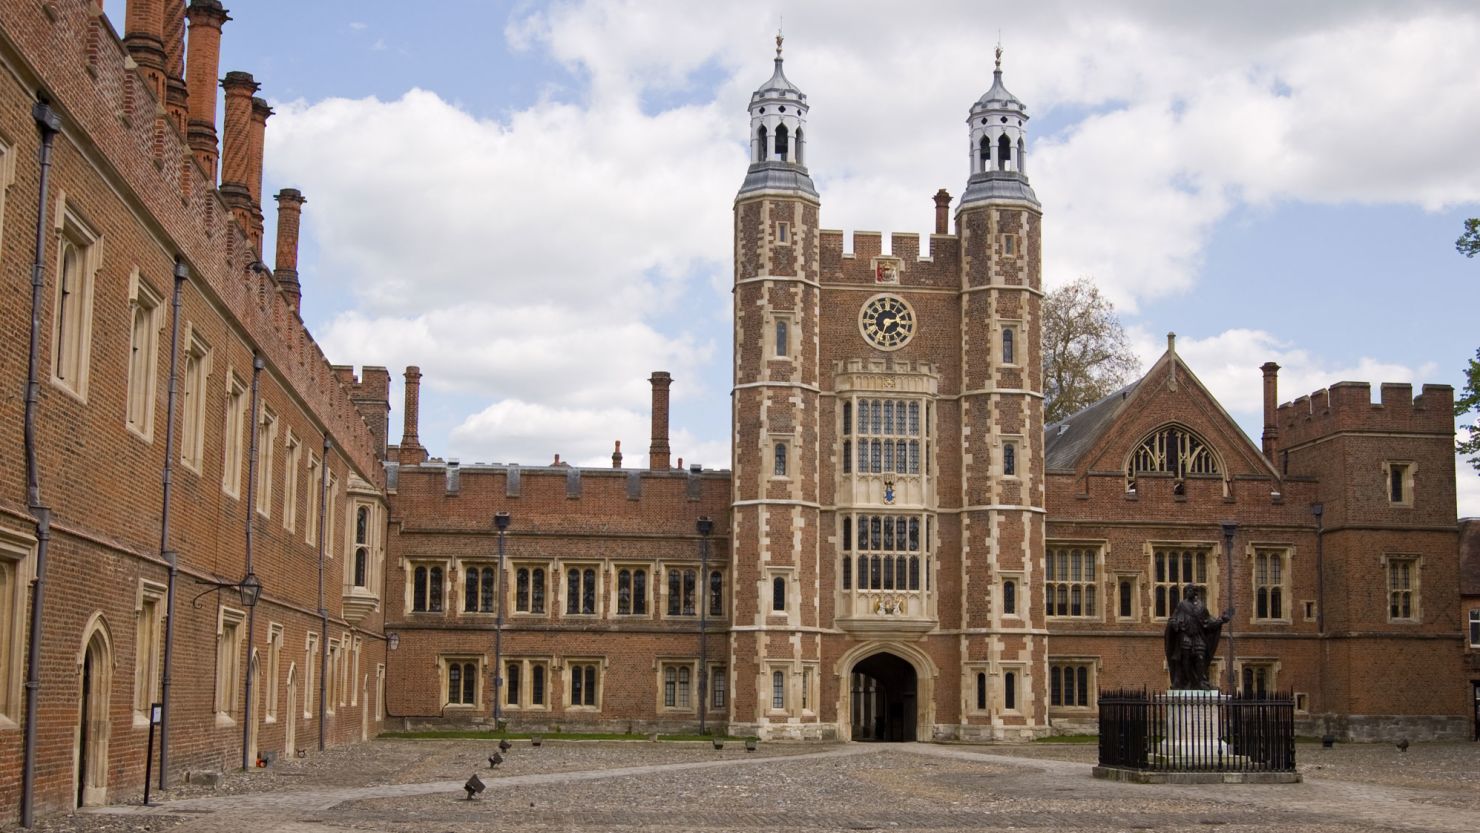 Many of the UK's prime ministers -- including Boris Johnson and former leader David Cameron -- attended Eton.